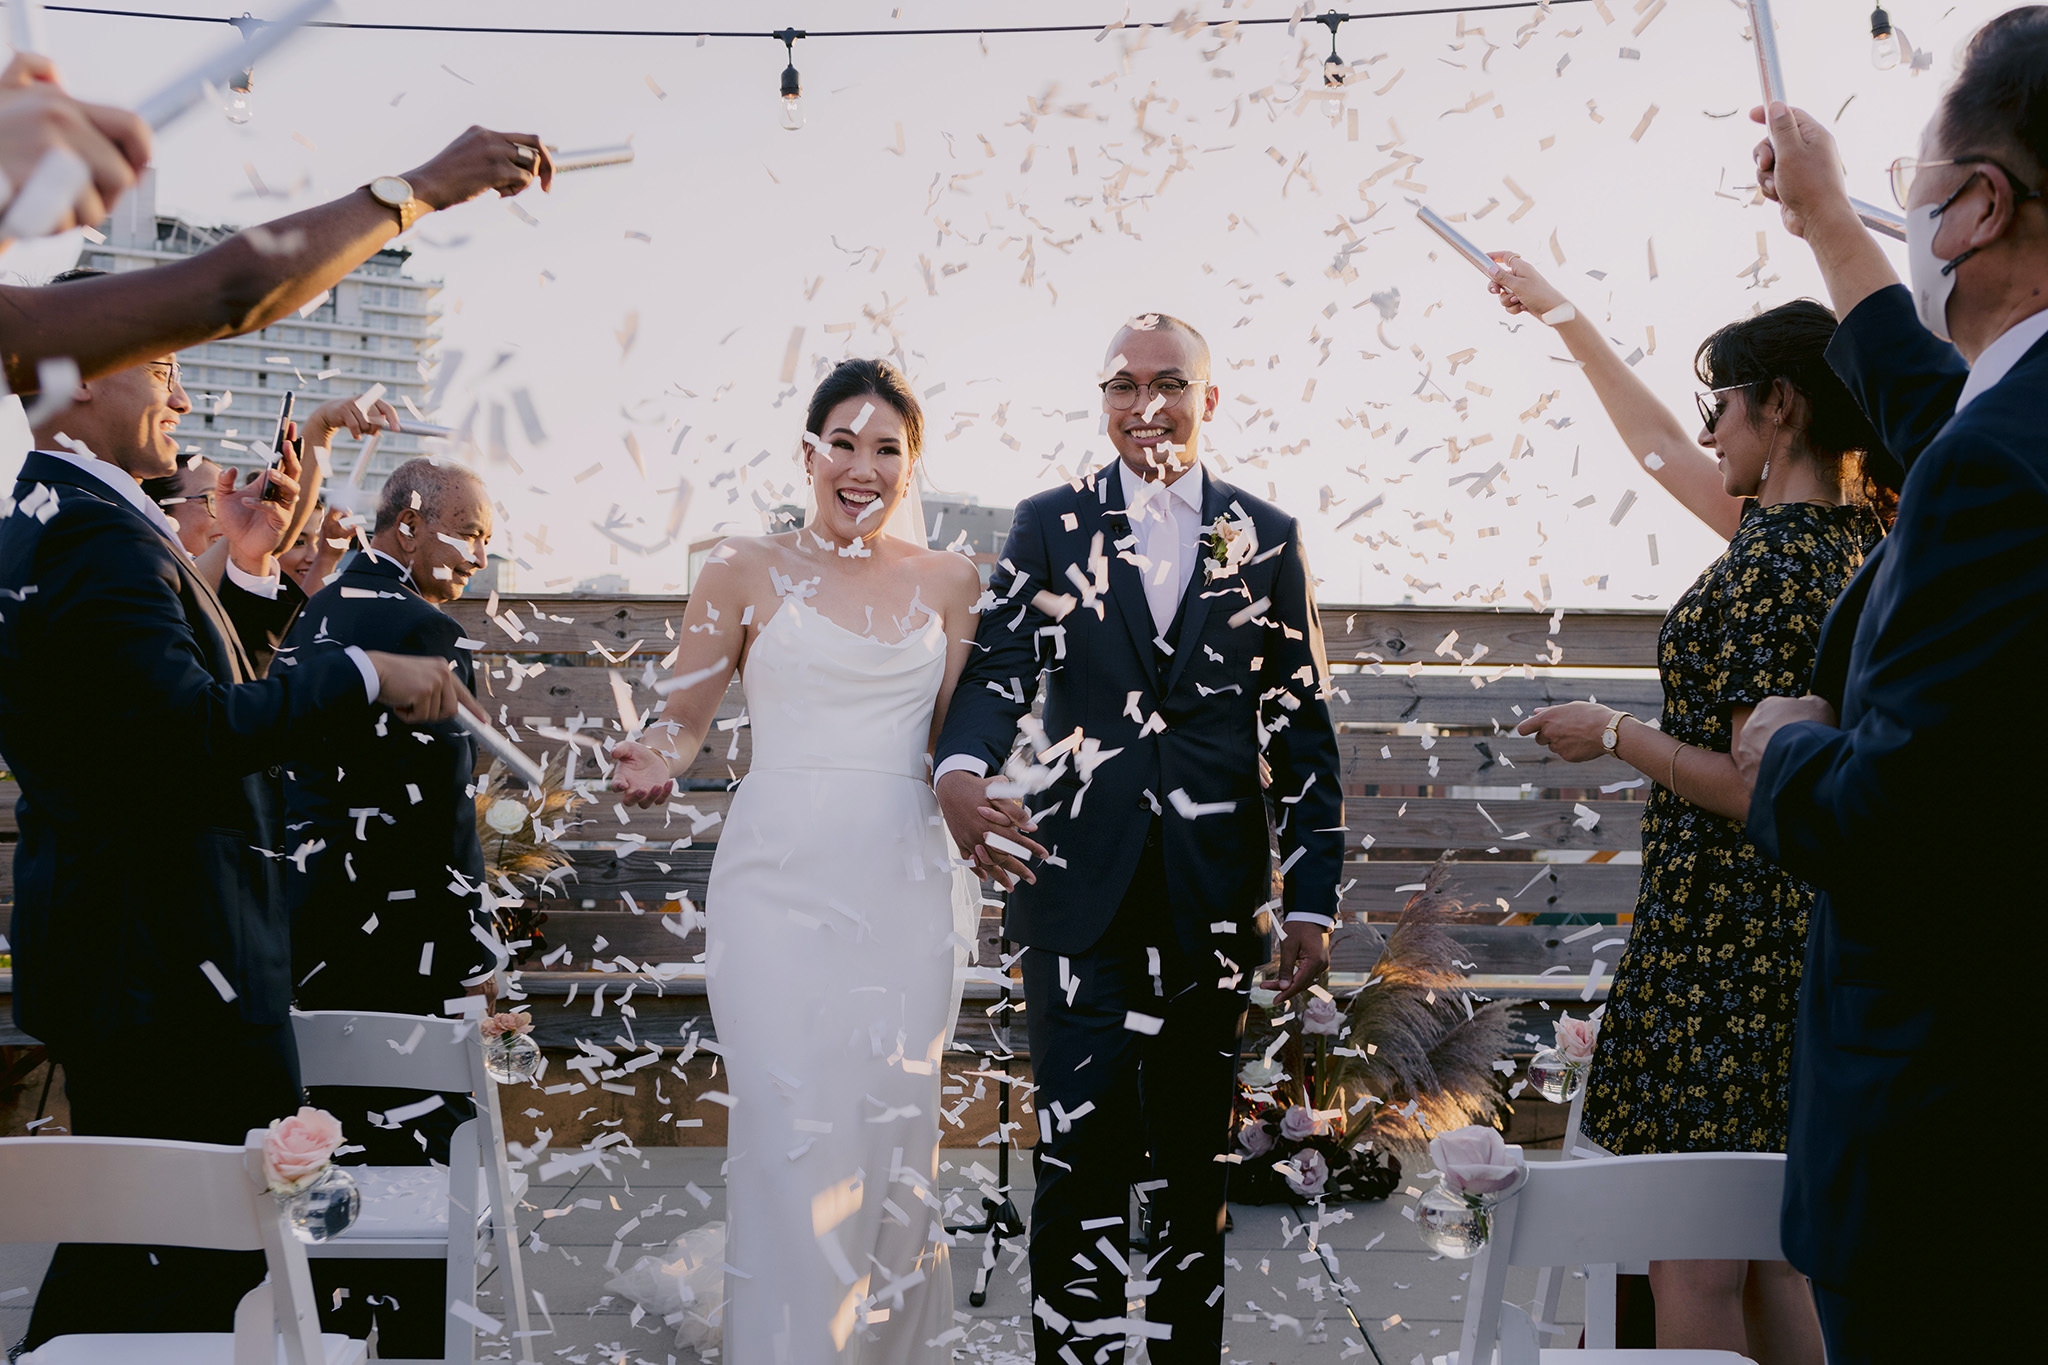 Wedding guests throw confetti as bride and groom walk down the aisle